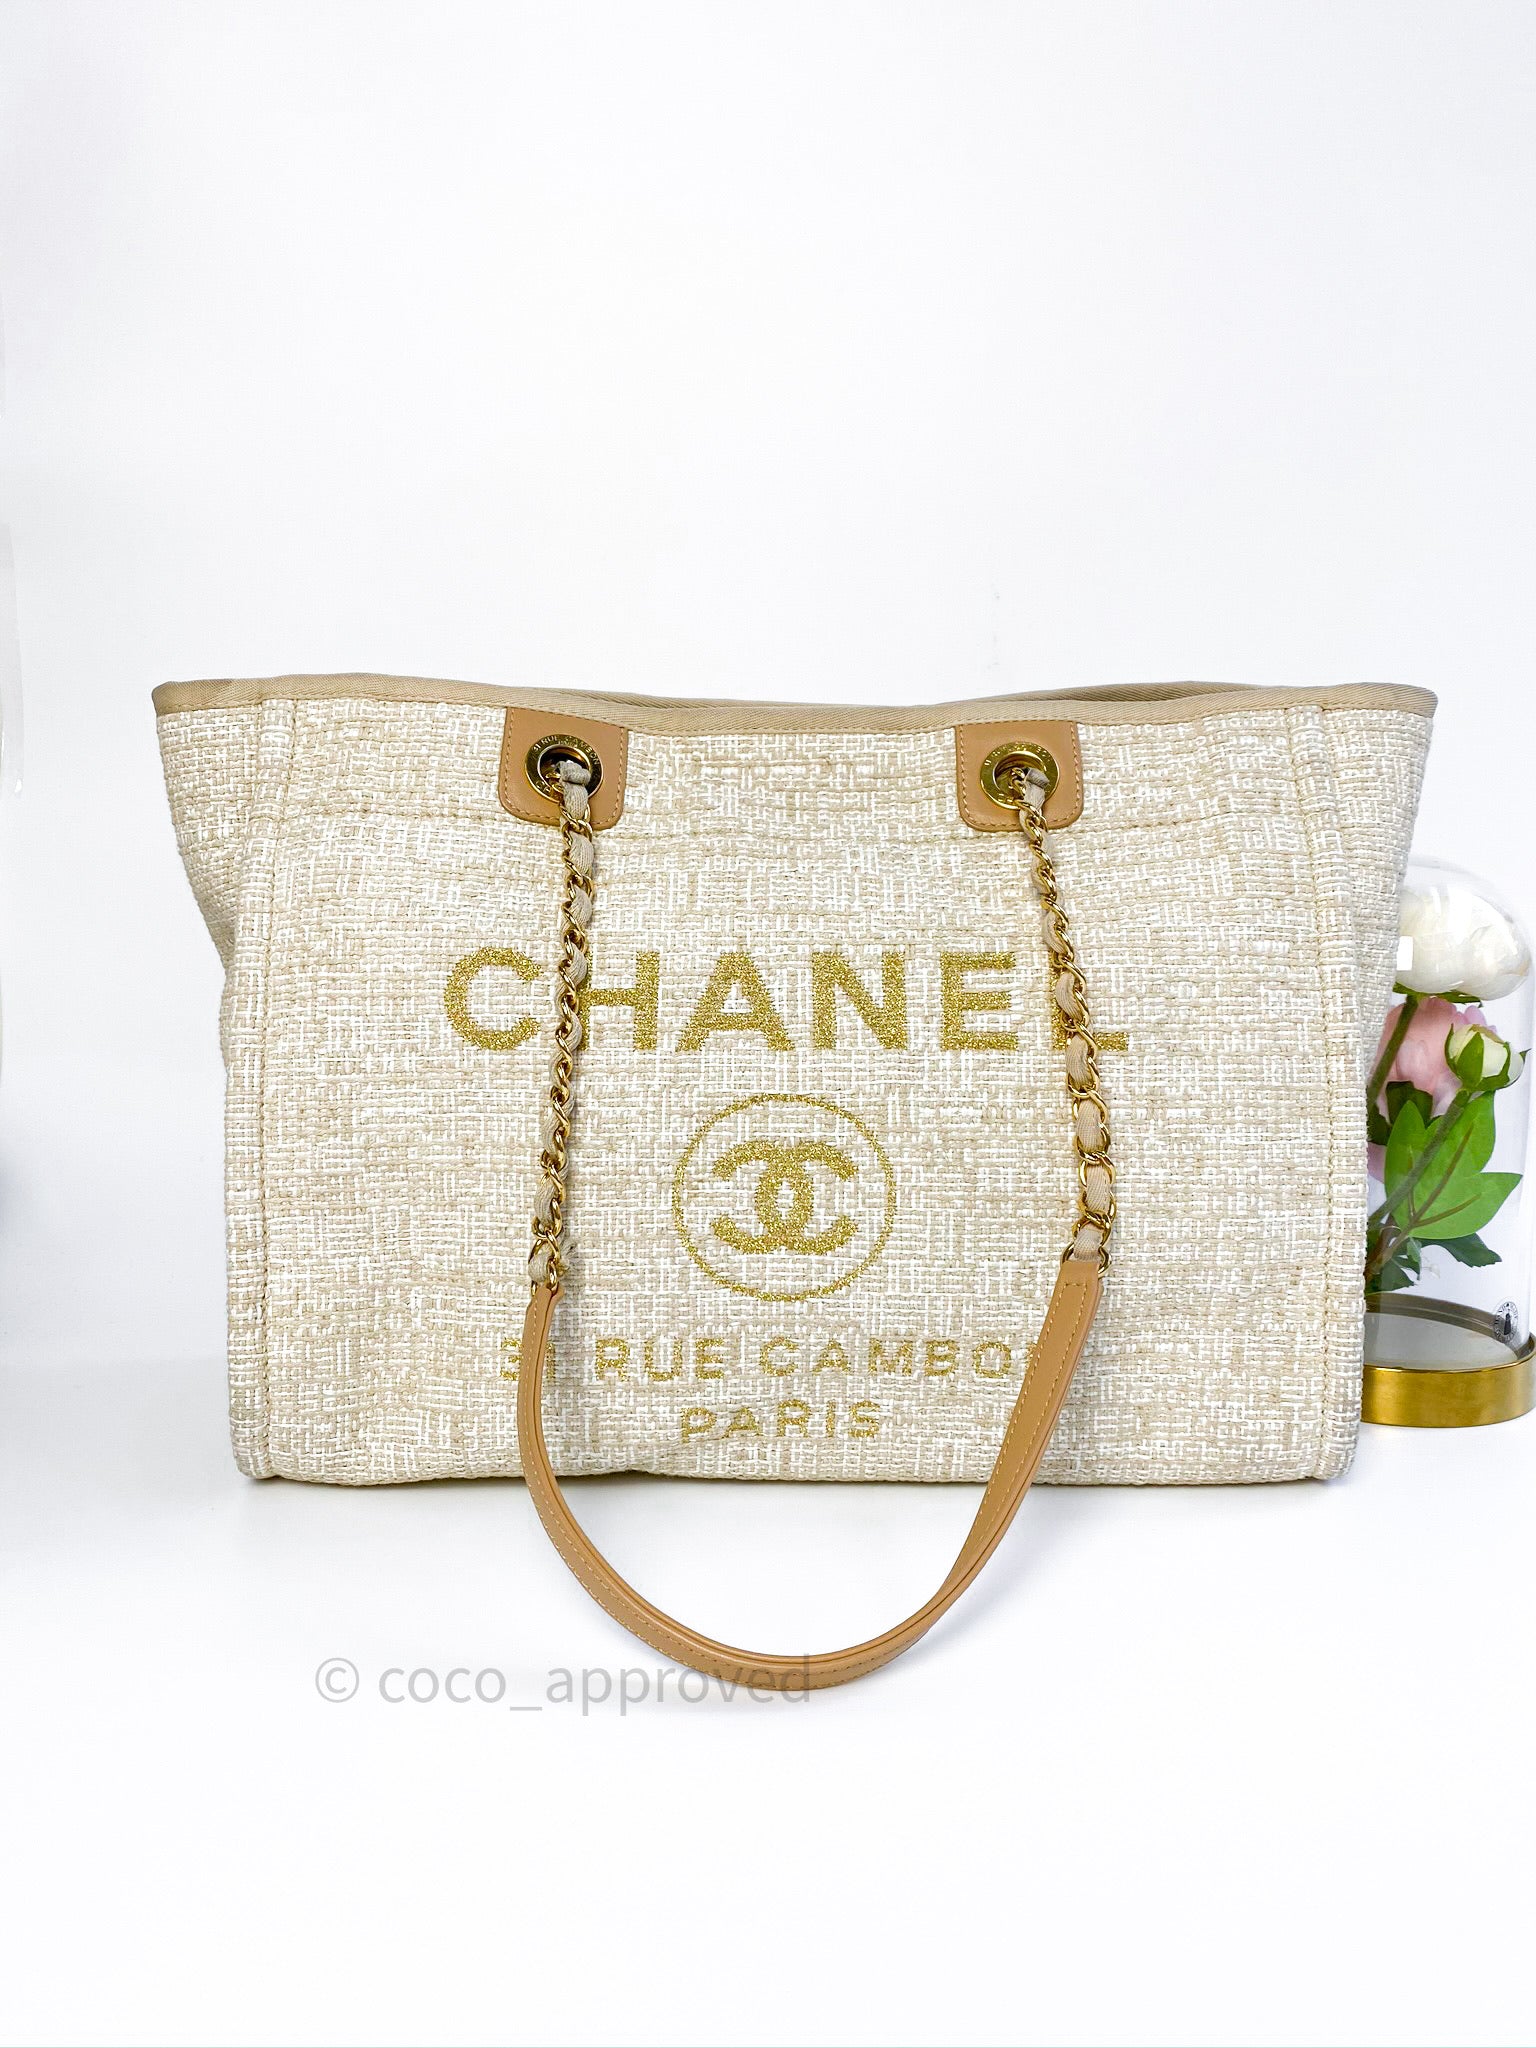 Chanel Deauville Small/Medium with Handles and Pouch, Off White with Silver  Hardware, New in Box GA001